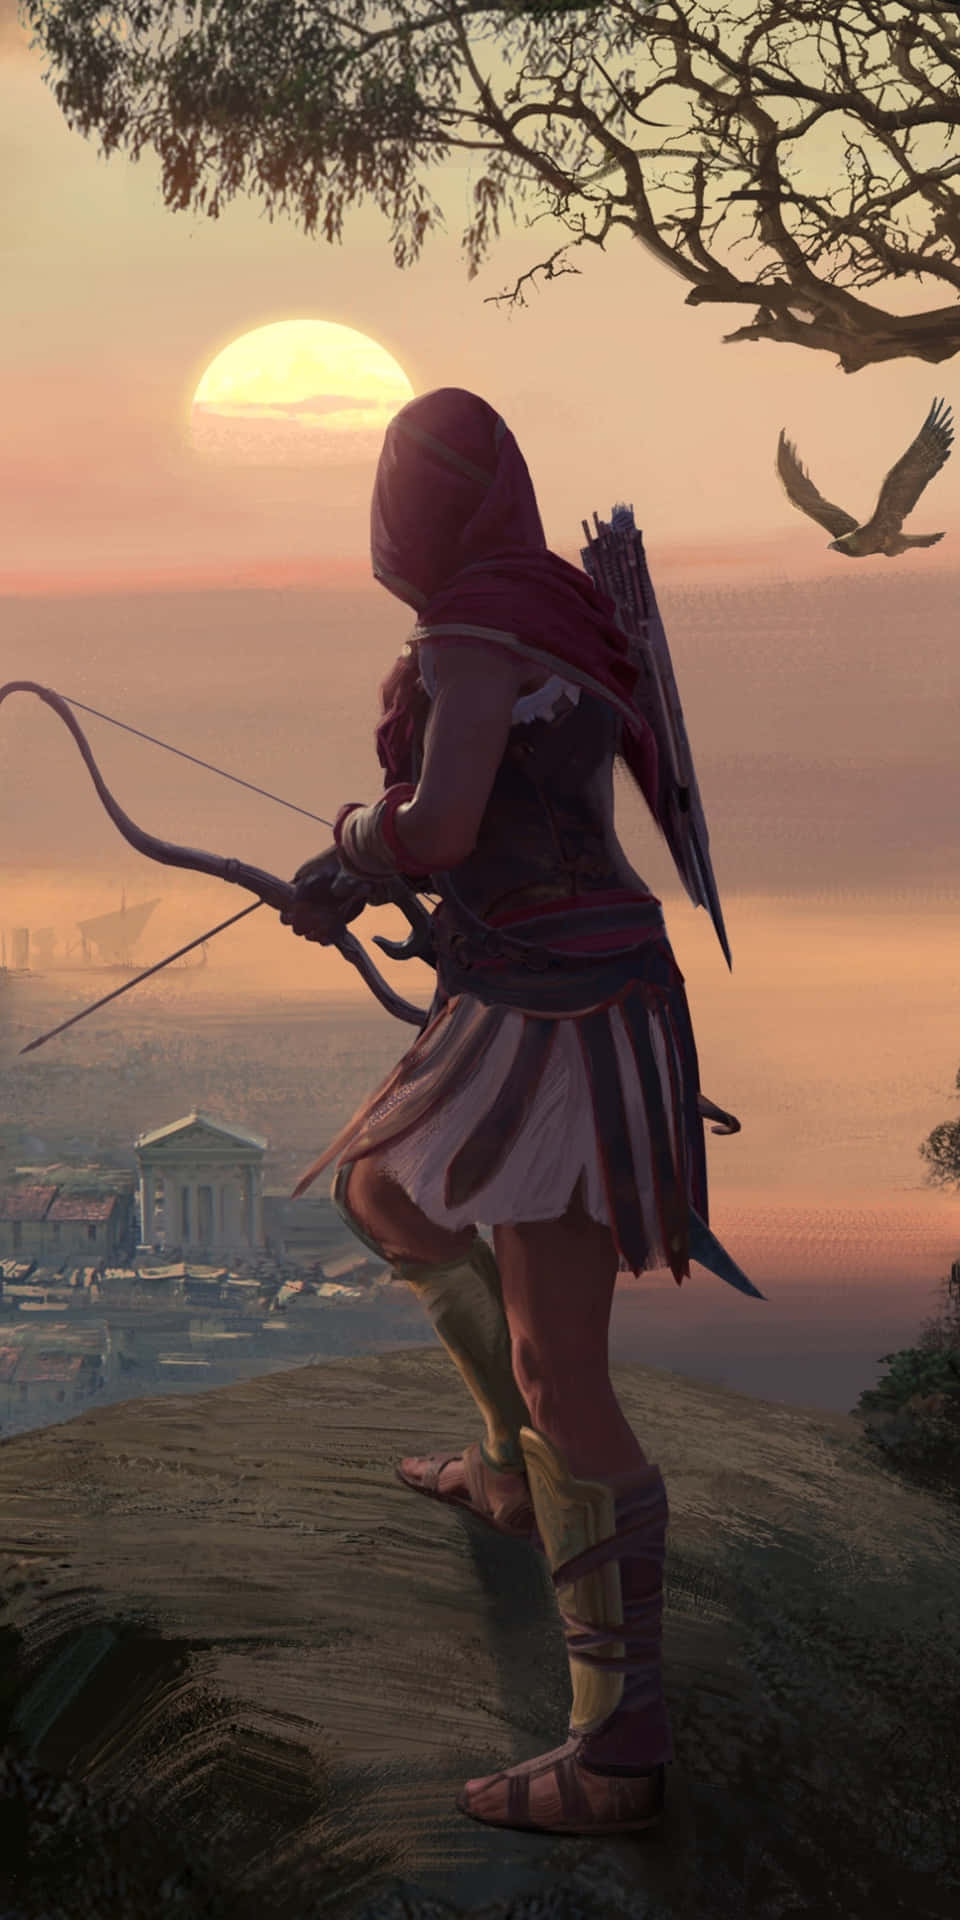 A Woman Is Standing On A Hill With A Bow And Arrow